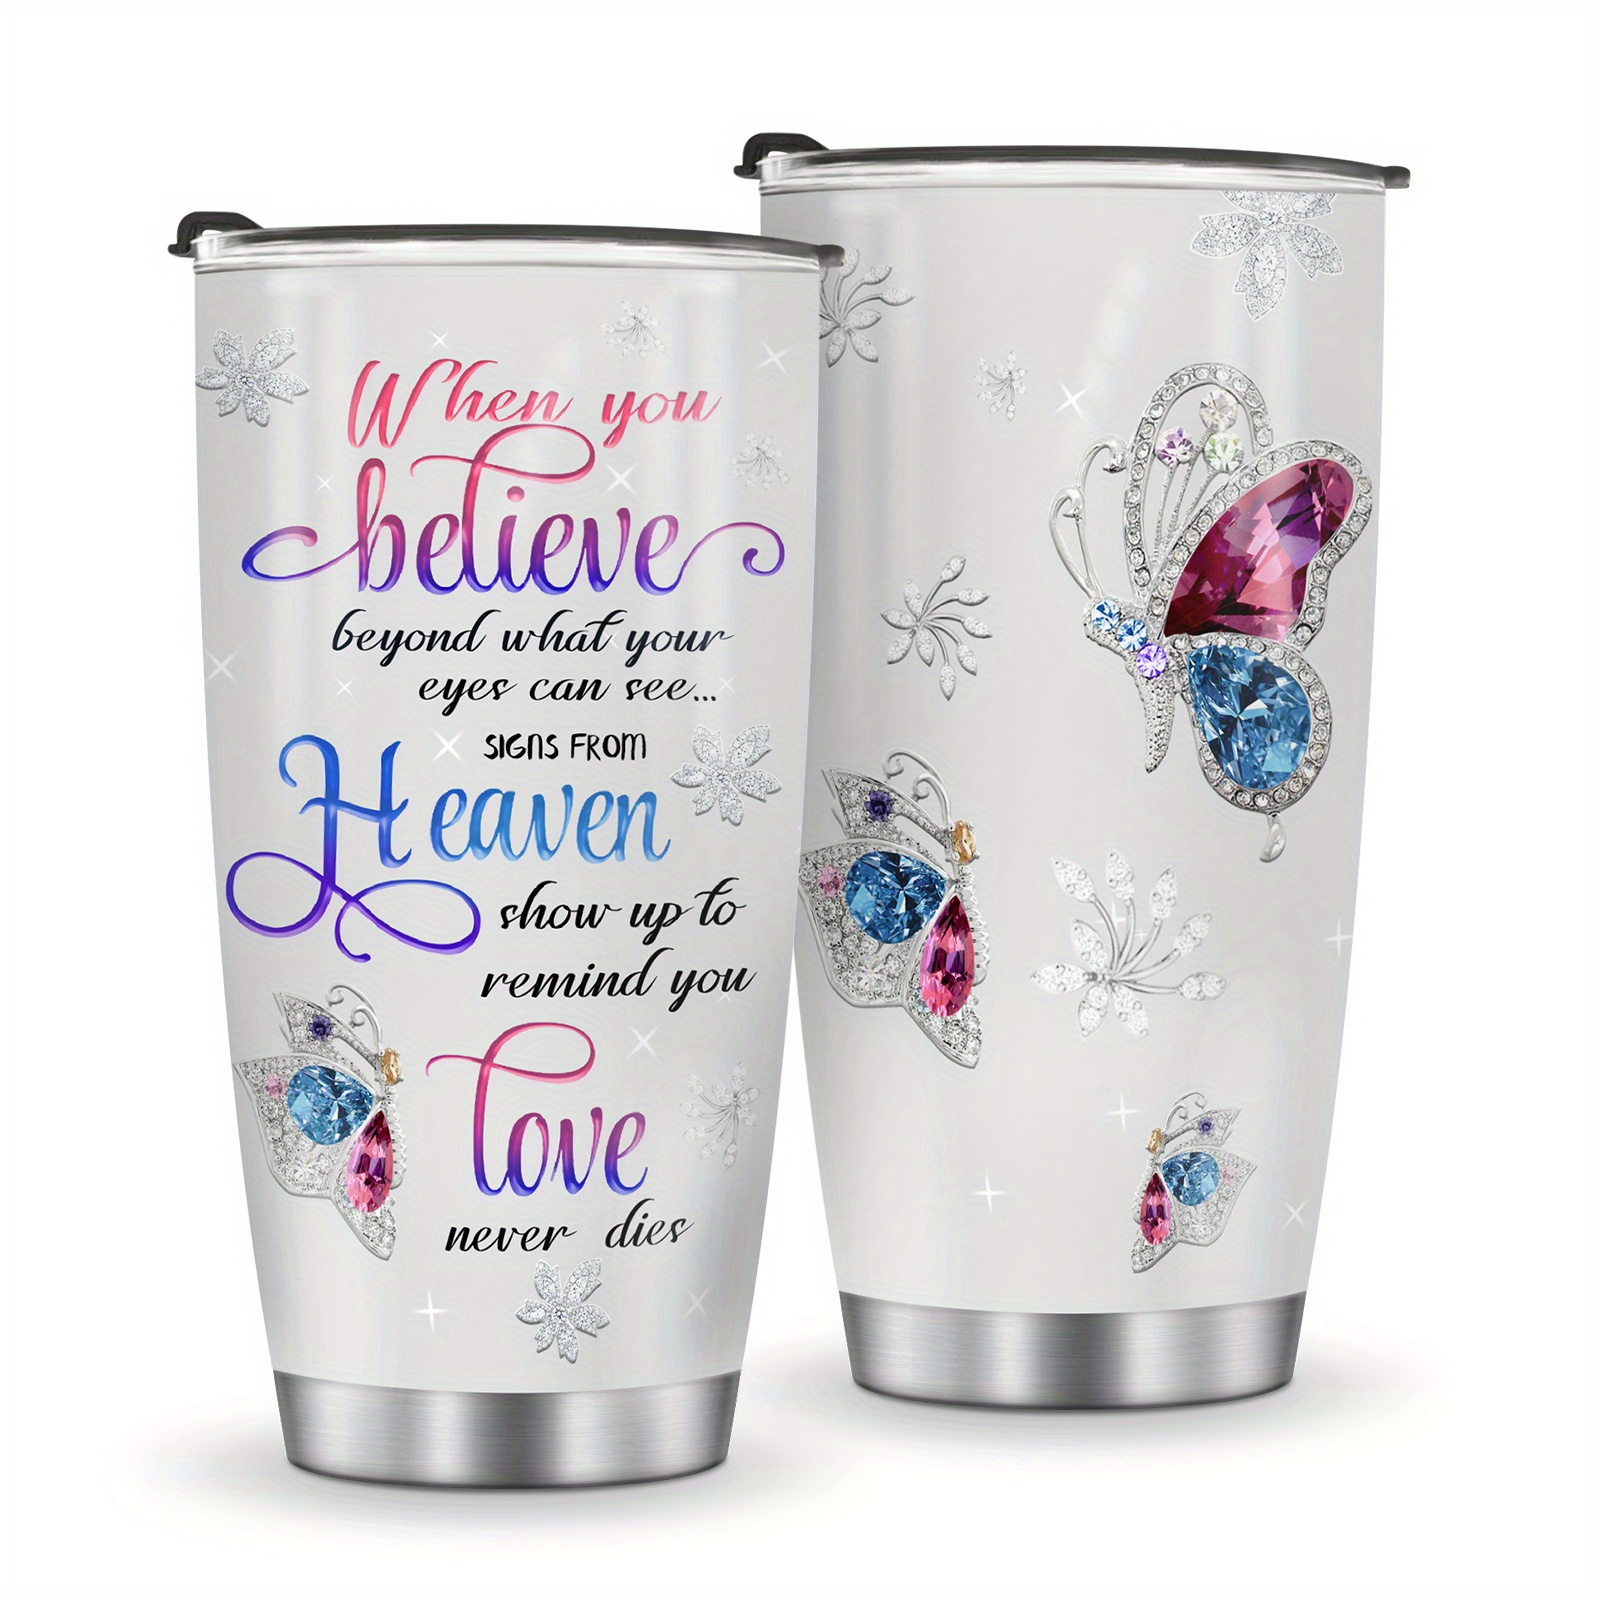 NEW COLORS 30oz Floral Engraved Quencher Tumbler W/ Handle Gifts for Mom,  Her, Grad, Bridal Party, Birthday, Friend, Family, Fall, School 